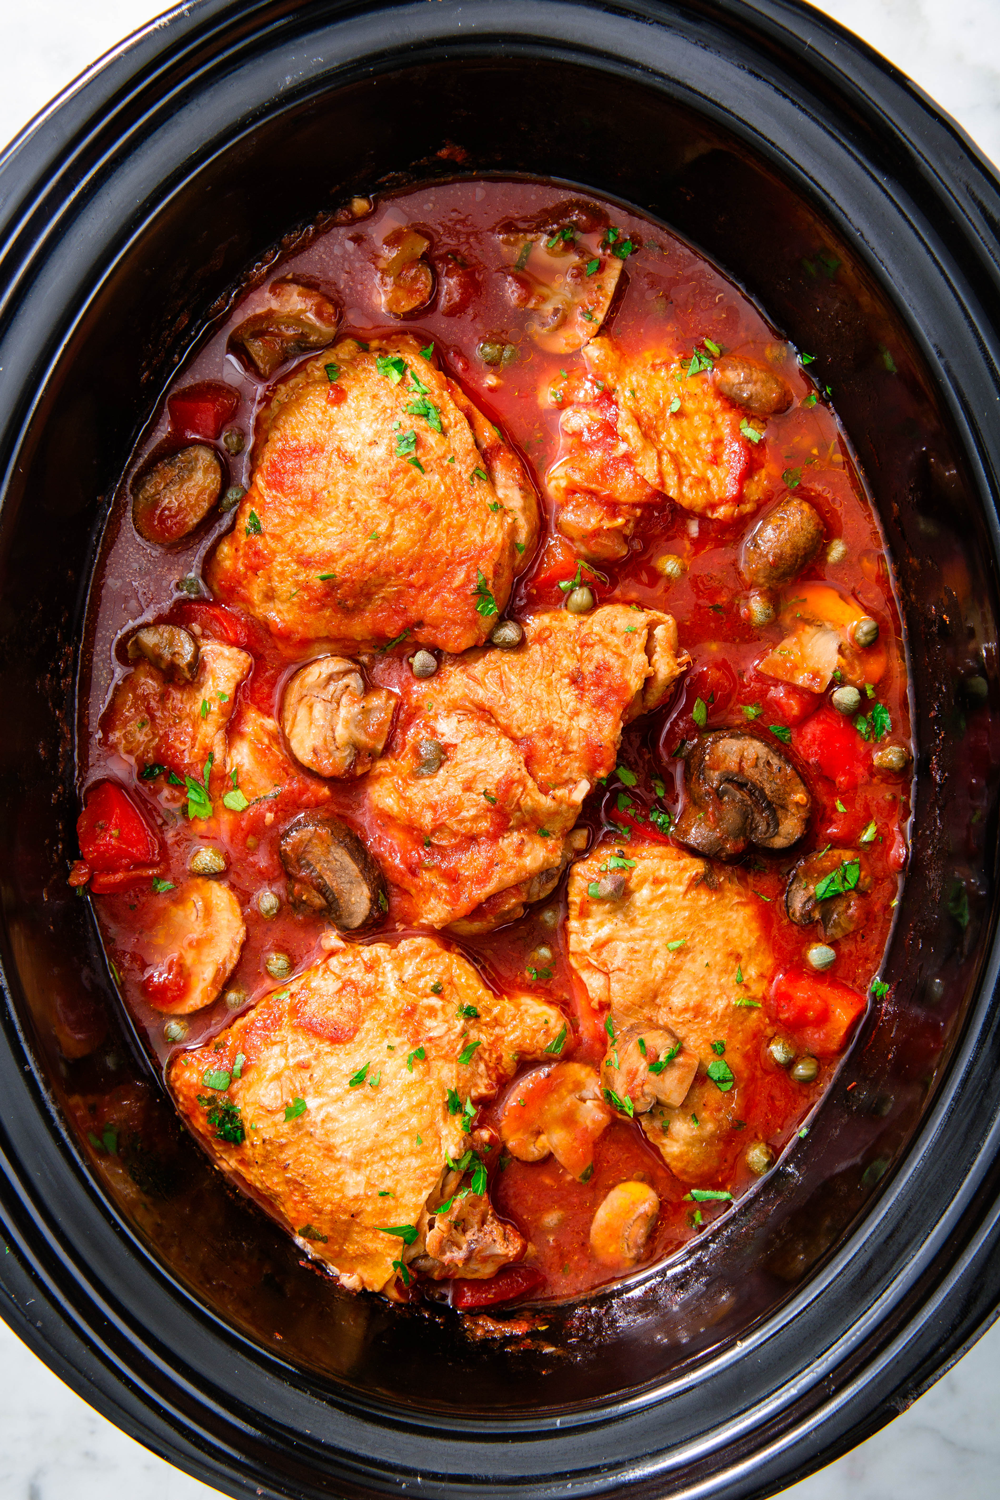 4 UNBELIEVABLE DUMP & GO CROCKPOT MEALS  COZY FALL SLOW COOKER RECIPES SO  EASY ANYONE CAN MAKE 